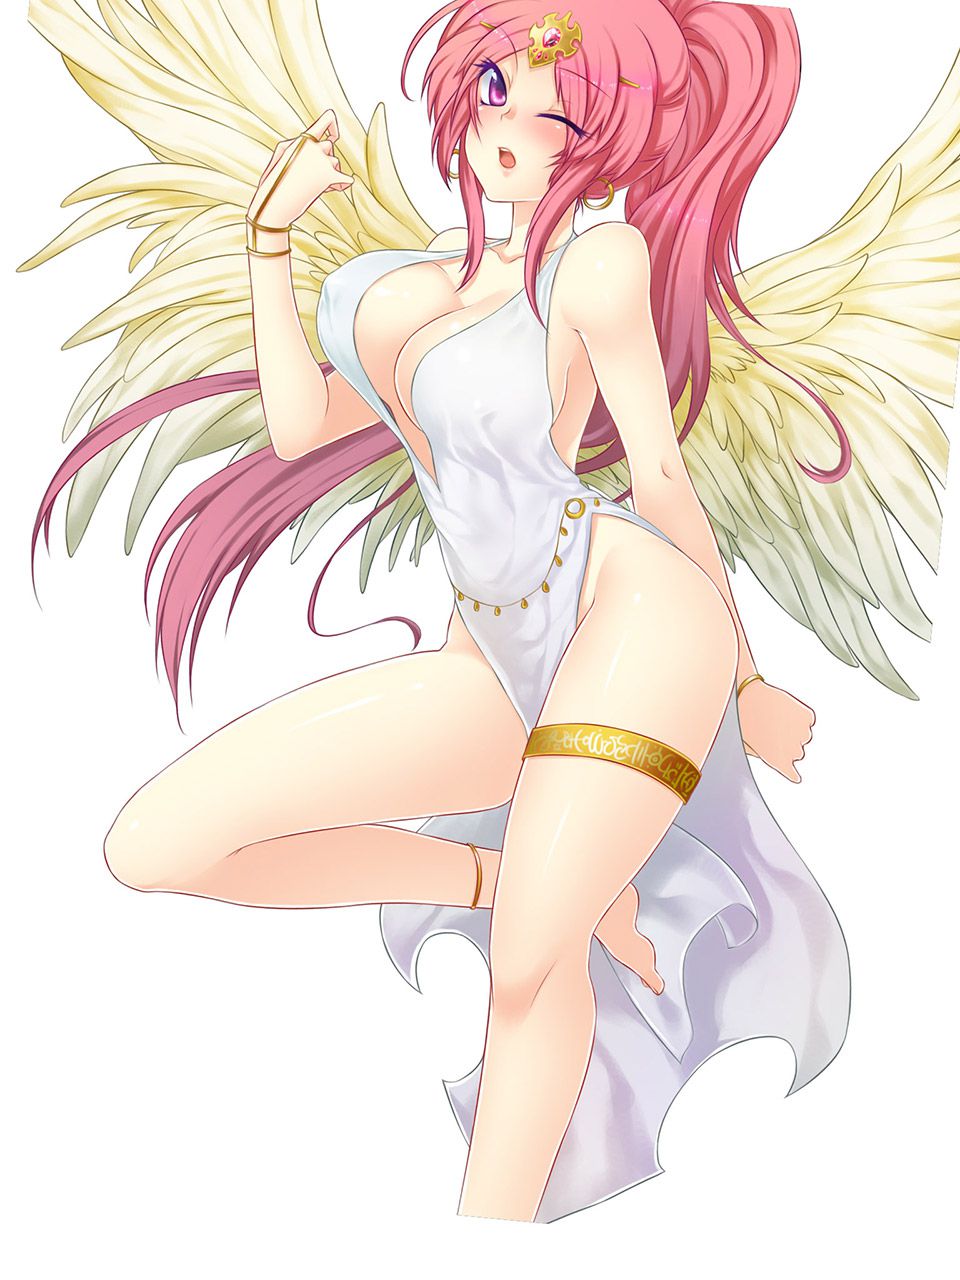 2D Please image of a girl with angel wings 48 photos 45